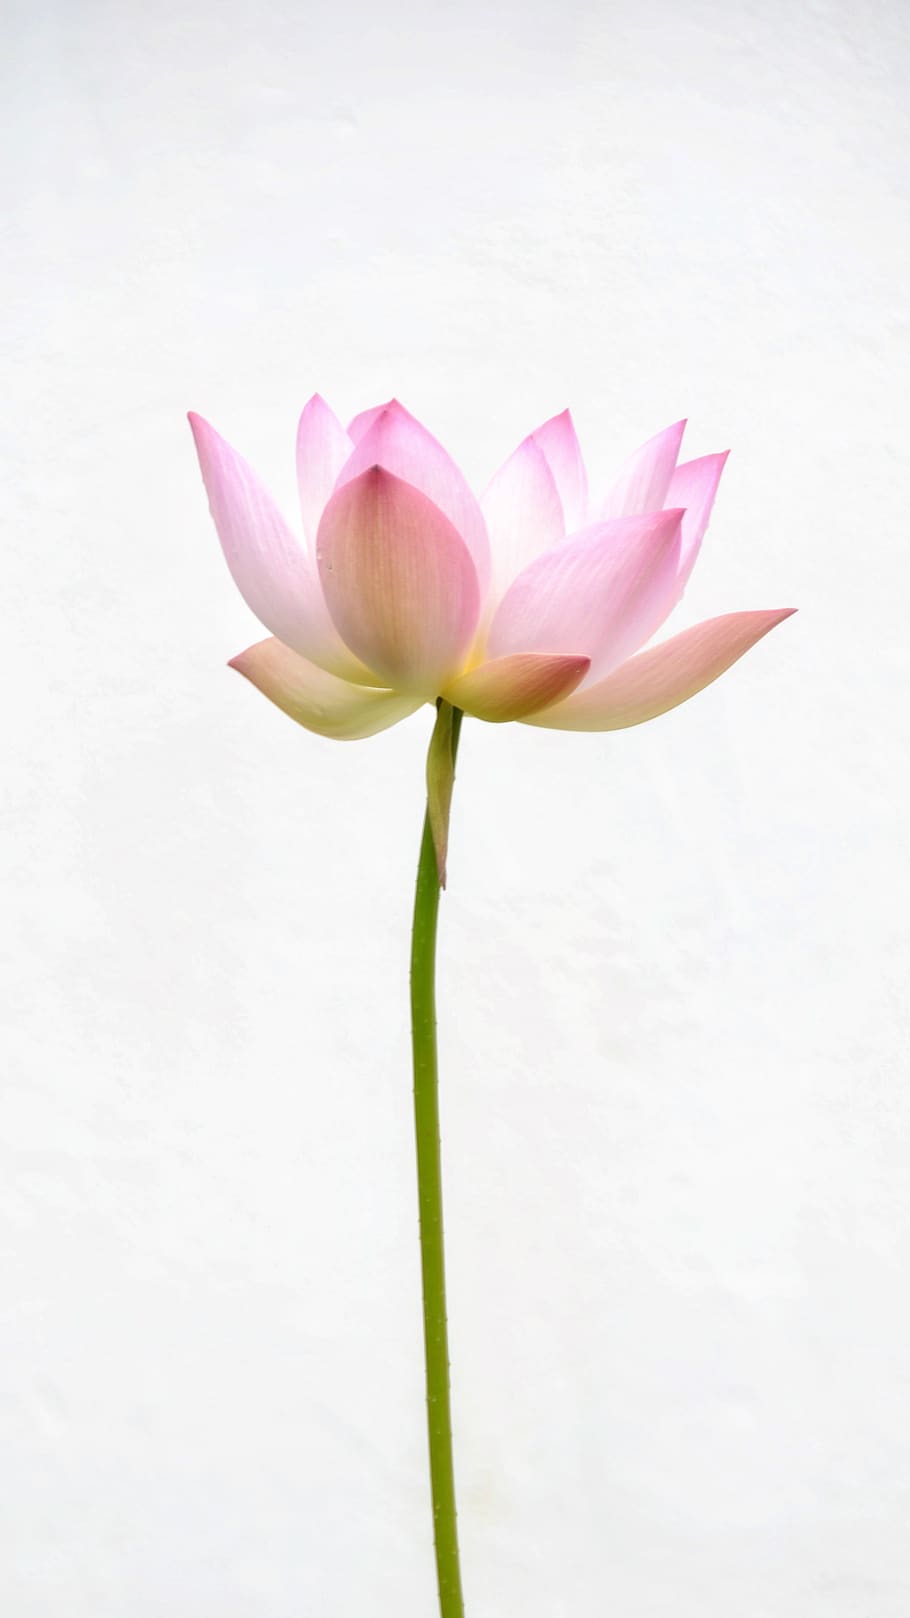 flower, red, lotus, zen, nature, plant, blossom, peace, relaxation, flowering plant